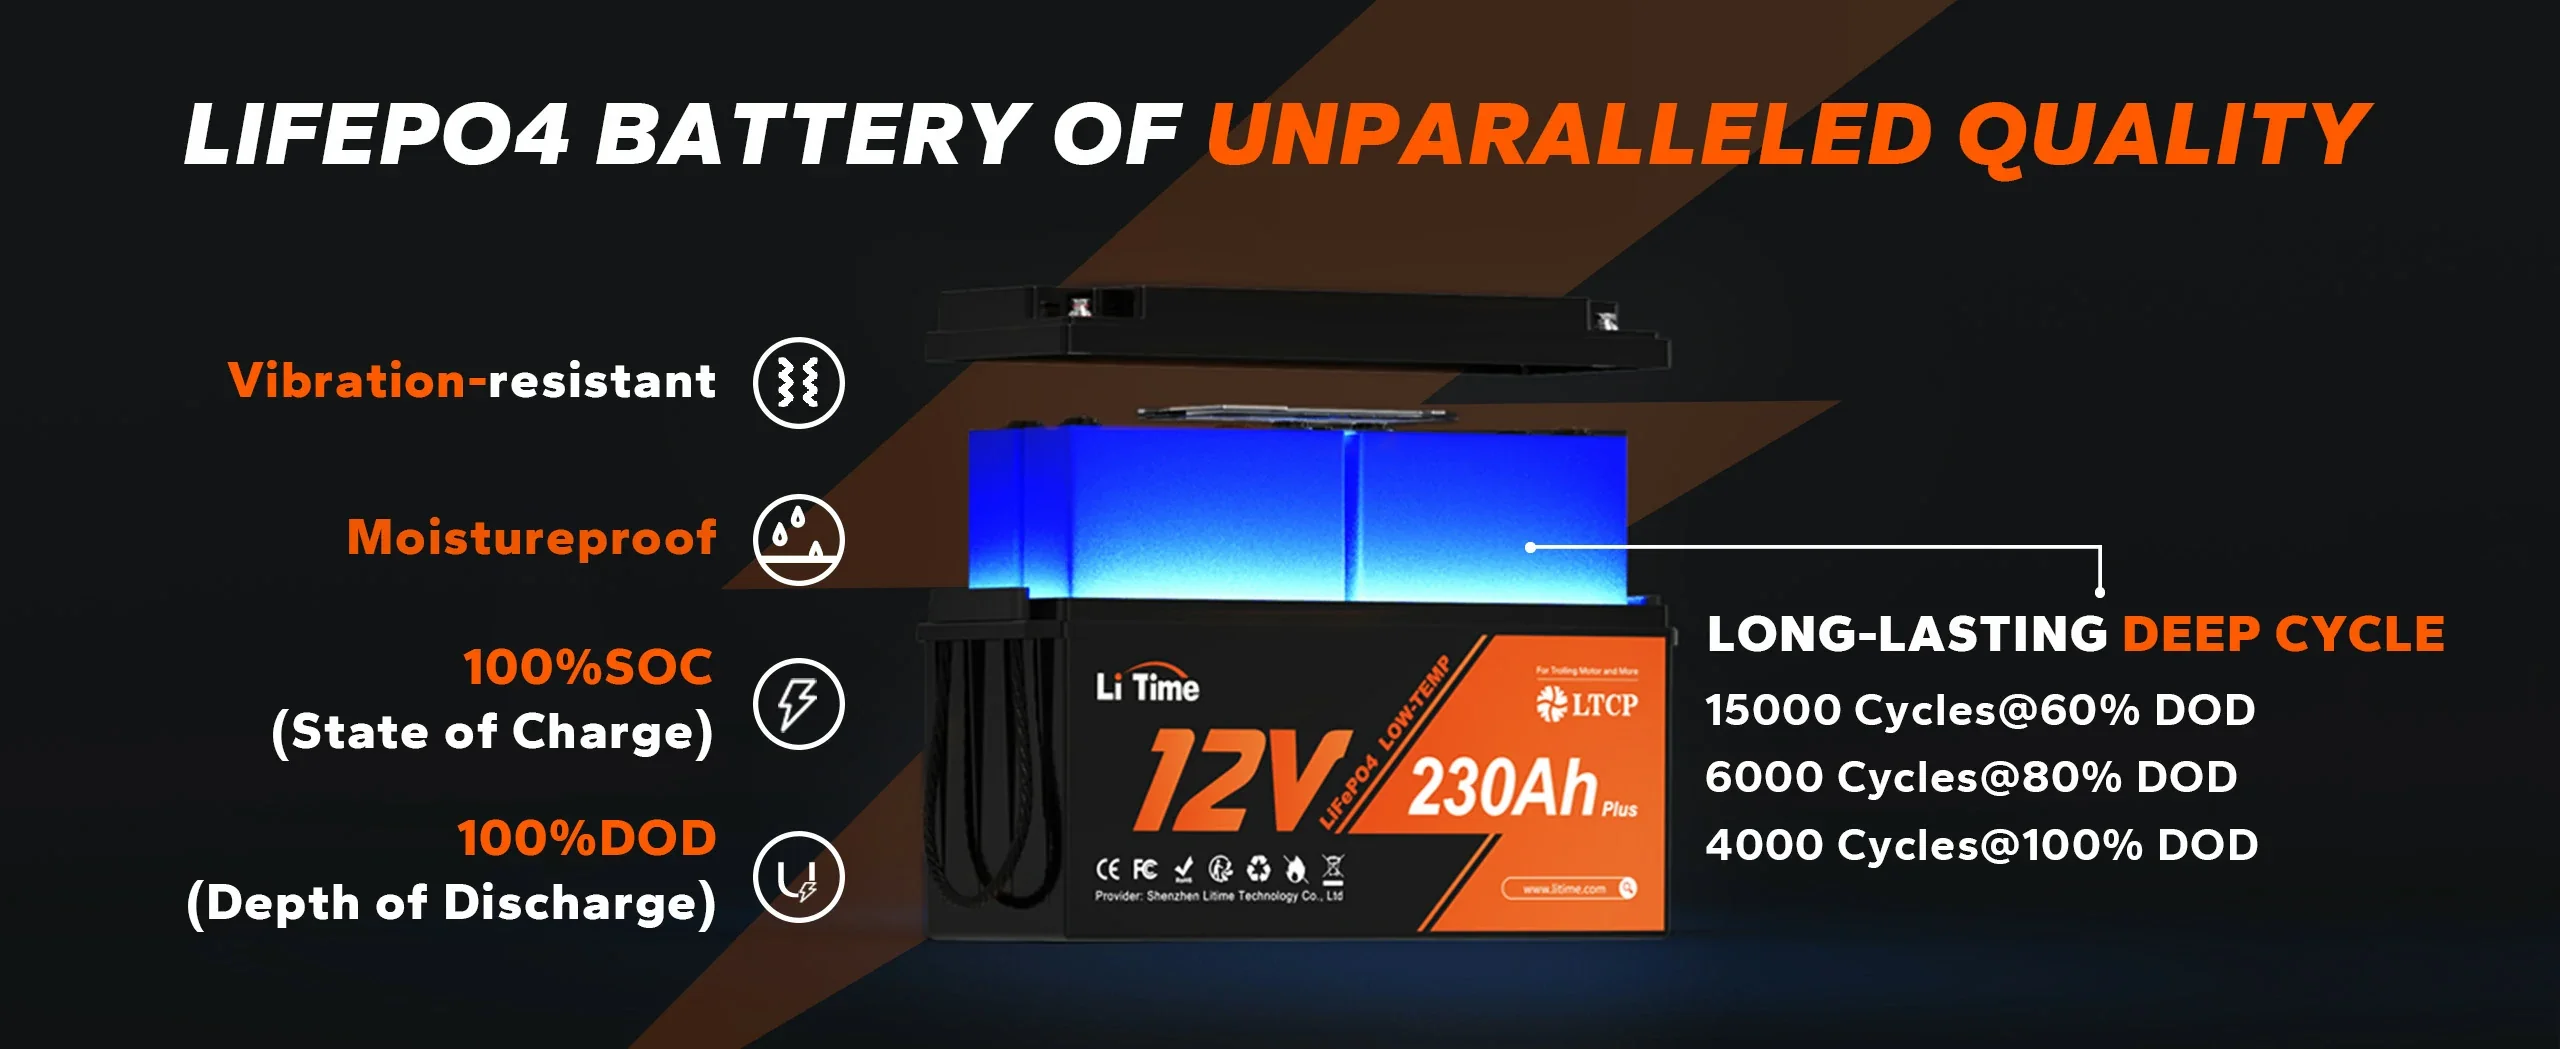  LiTime 12V 230Ah Plus Low-Temp Protection LiFePO4 Battery superior performance